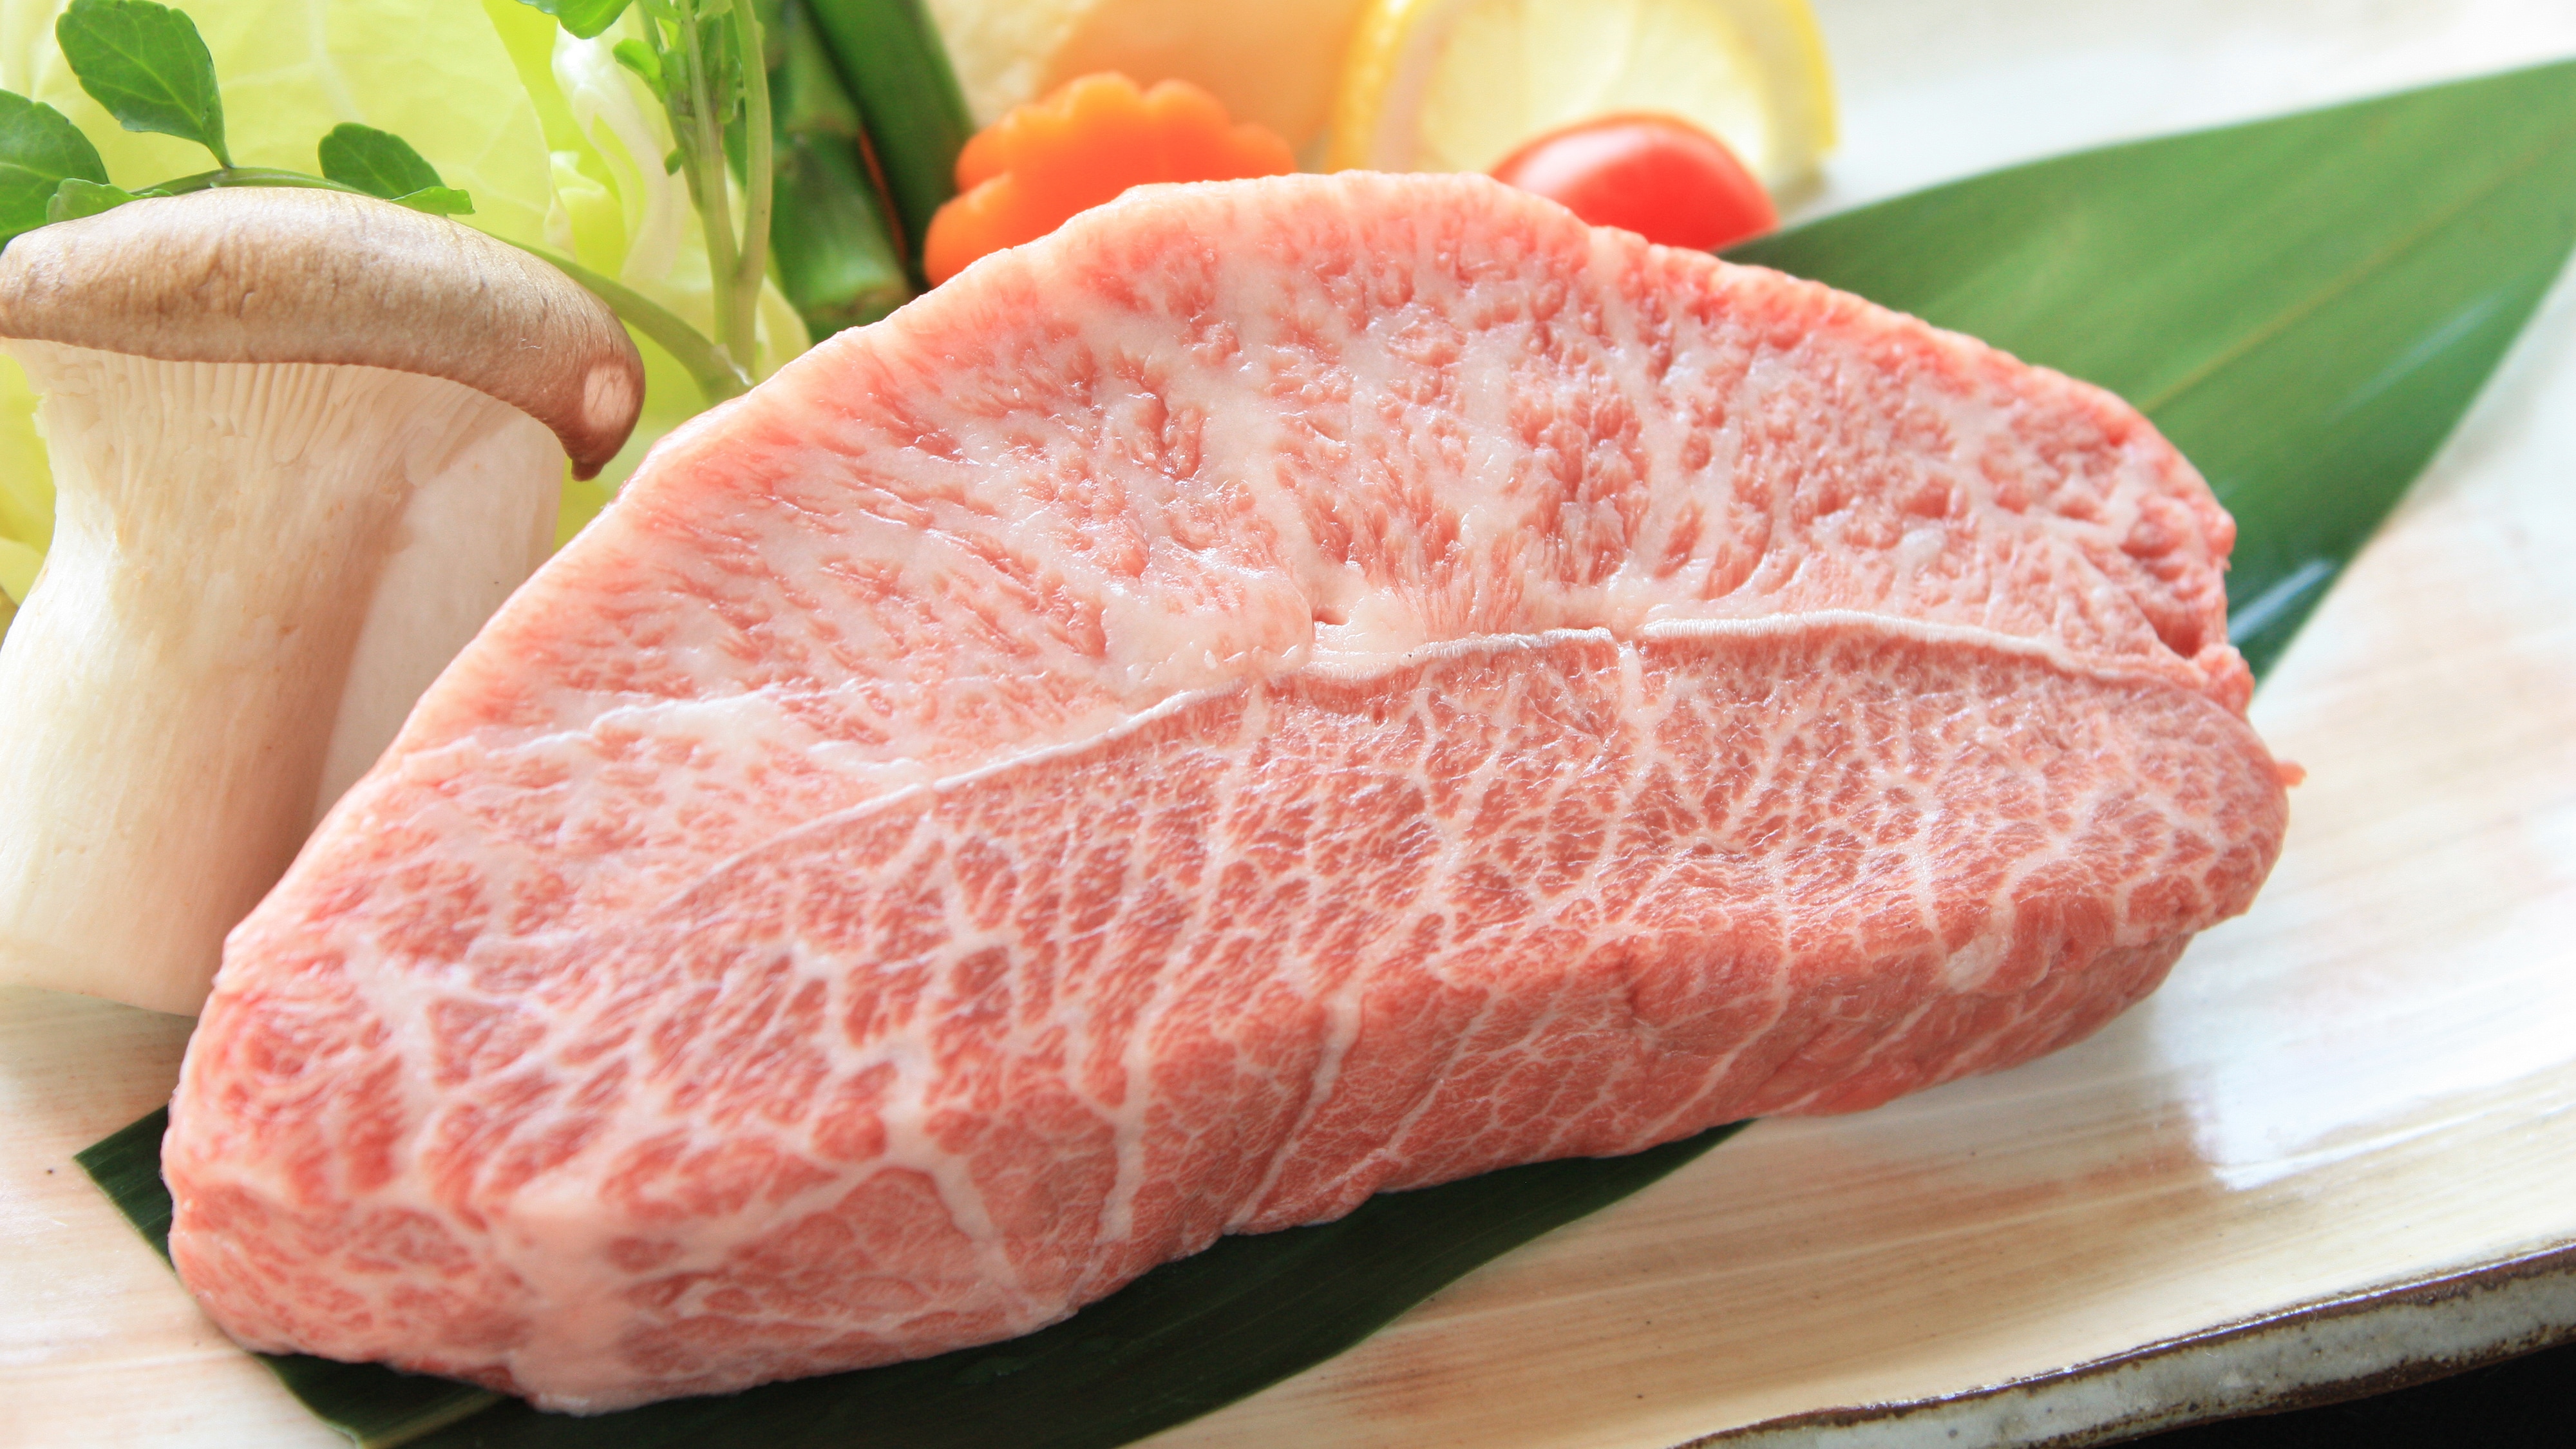 Rare part menu ◆ "Blade steak" is the meat inside the scapula that weighs only a few hundred grams from one head.